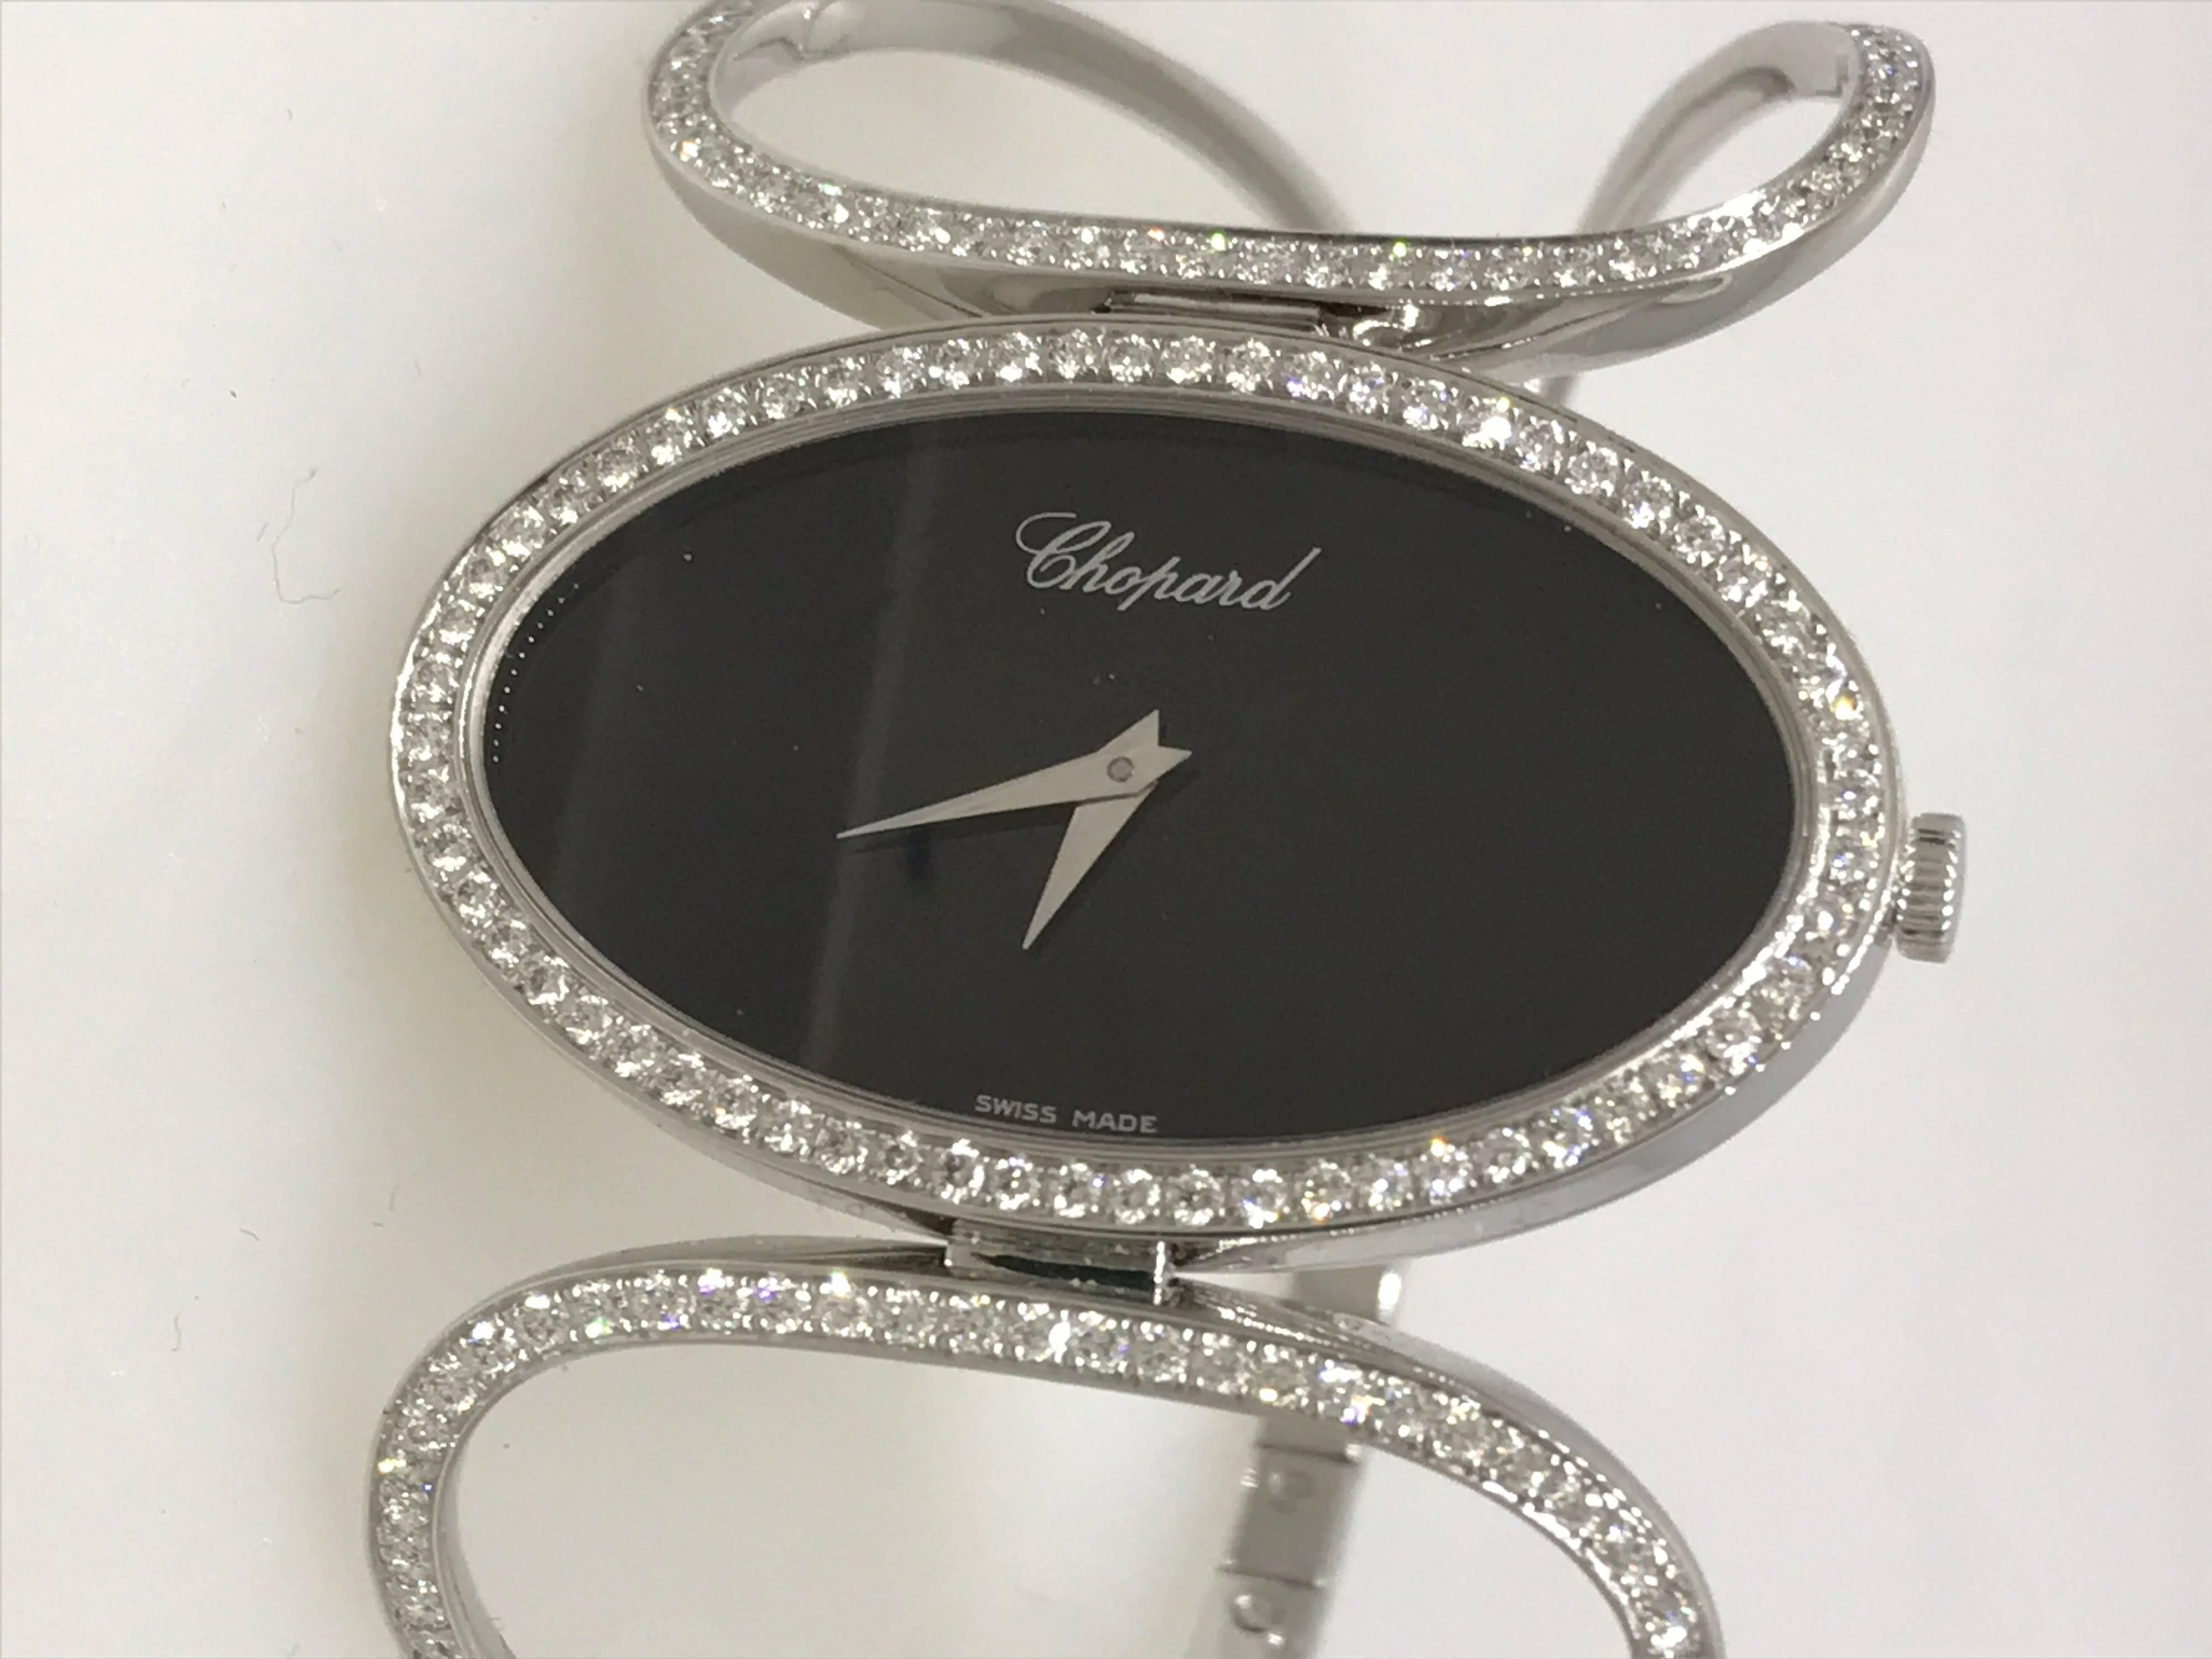 Chopard Classique Lady's watch

Model Number: 10/7223-1001

100% Authentic

New / Old Stock

Comes with original Chopard certificate of authenticity and warranty, and jewels manual

18 Karat White Gold Case and Bracelet

Case and Bracelet set with